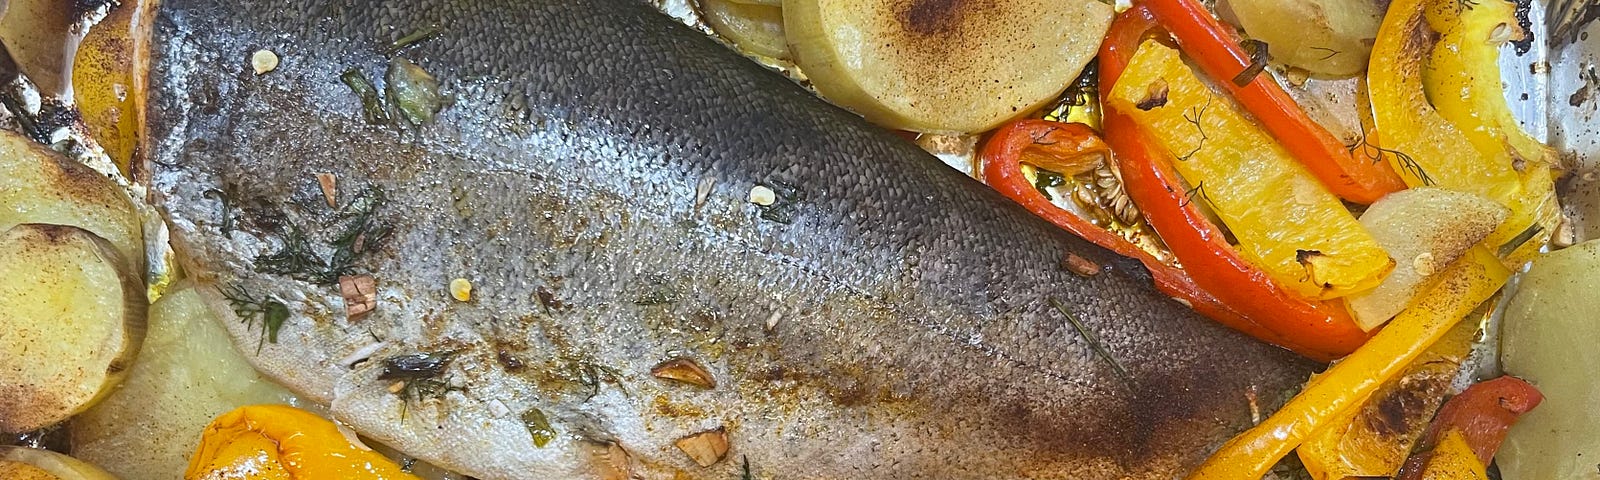 A grilled and baked whole trout with potatoes, vegetables, and herbs